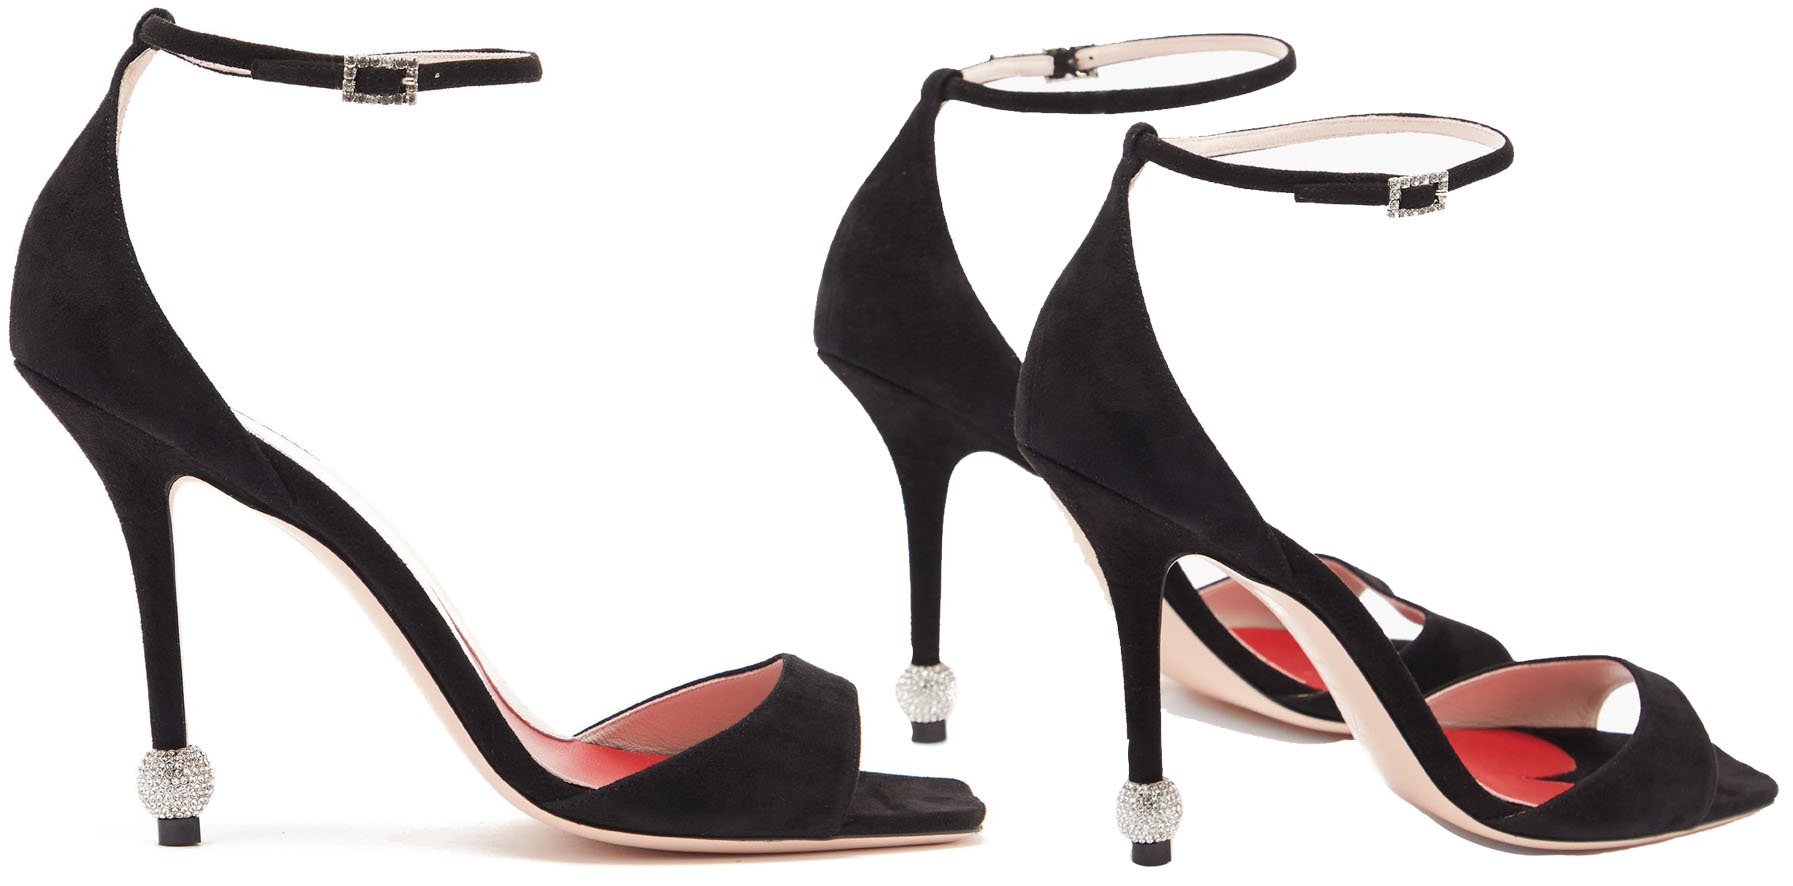 The Marlene sandals are discreetly accented with crystals on the buckled straps and Aiguille heels